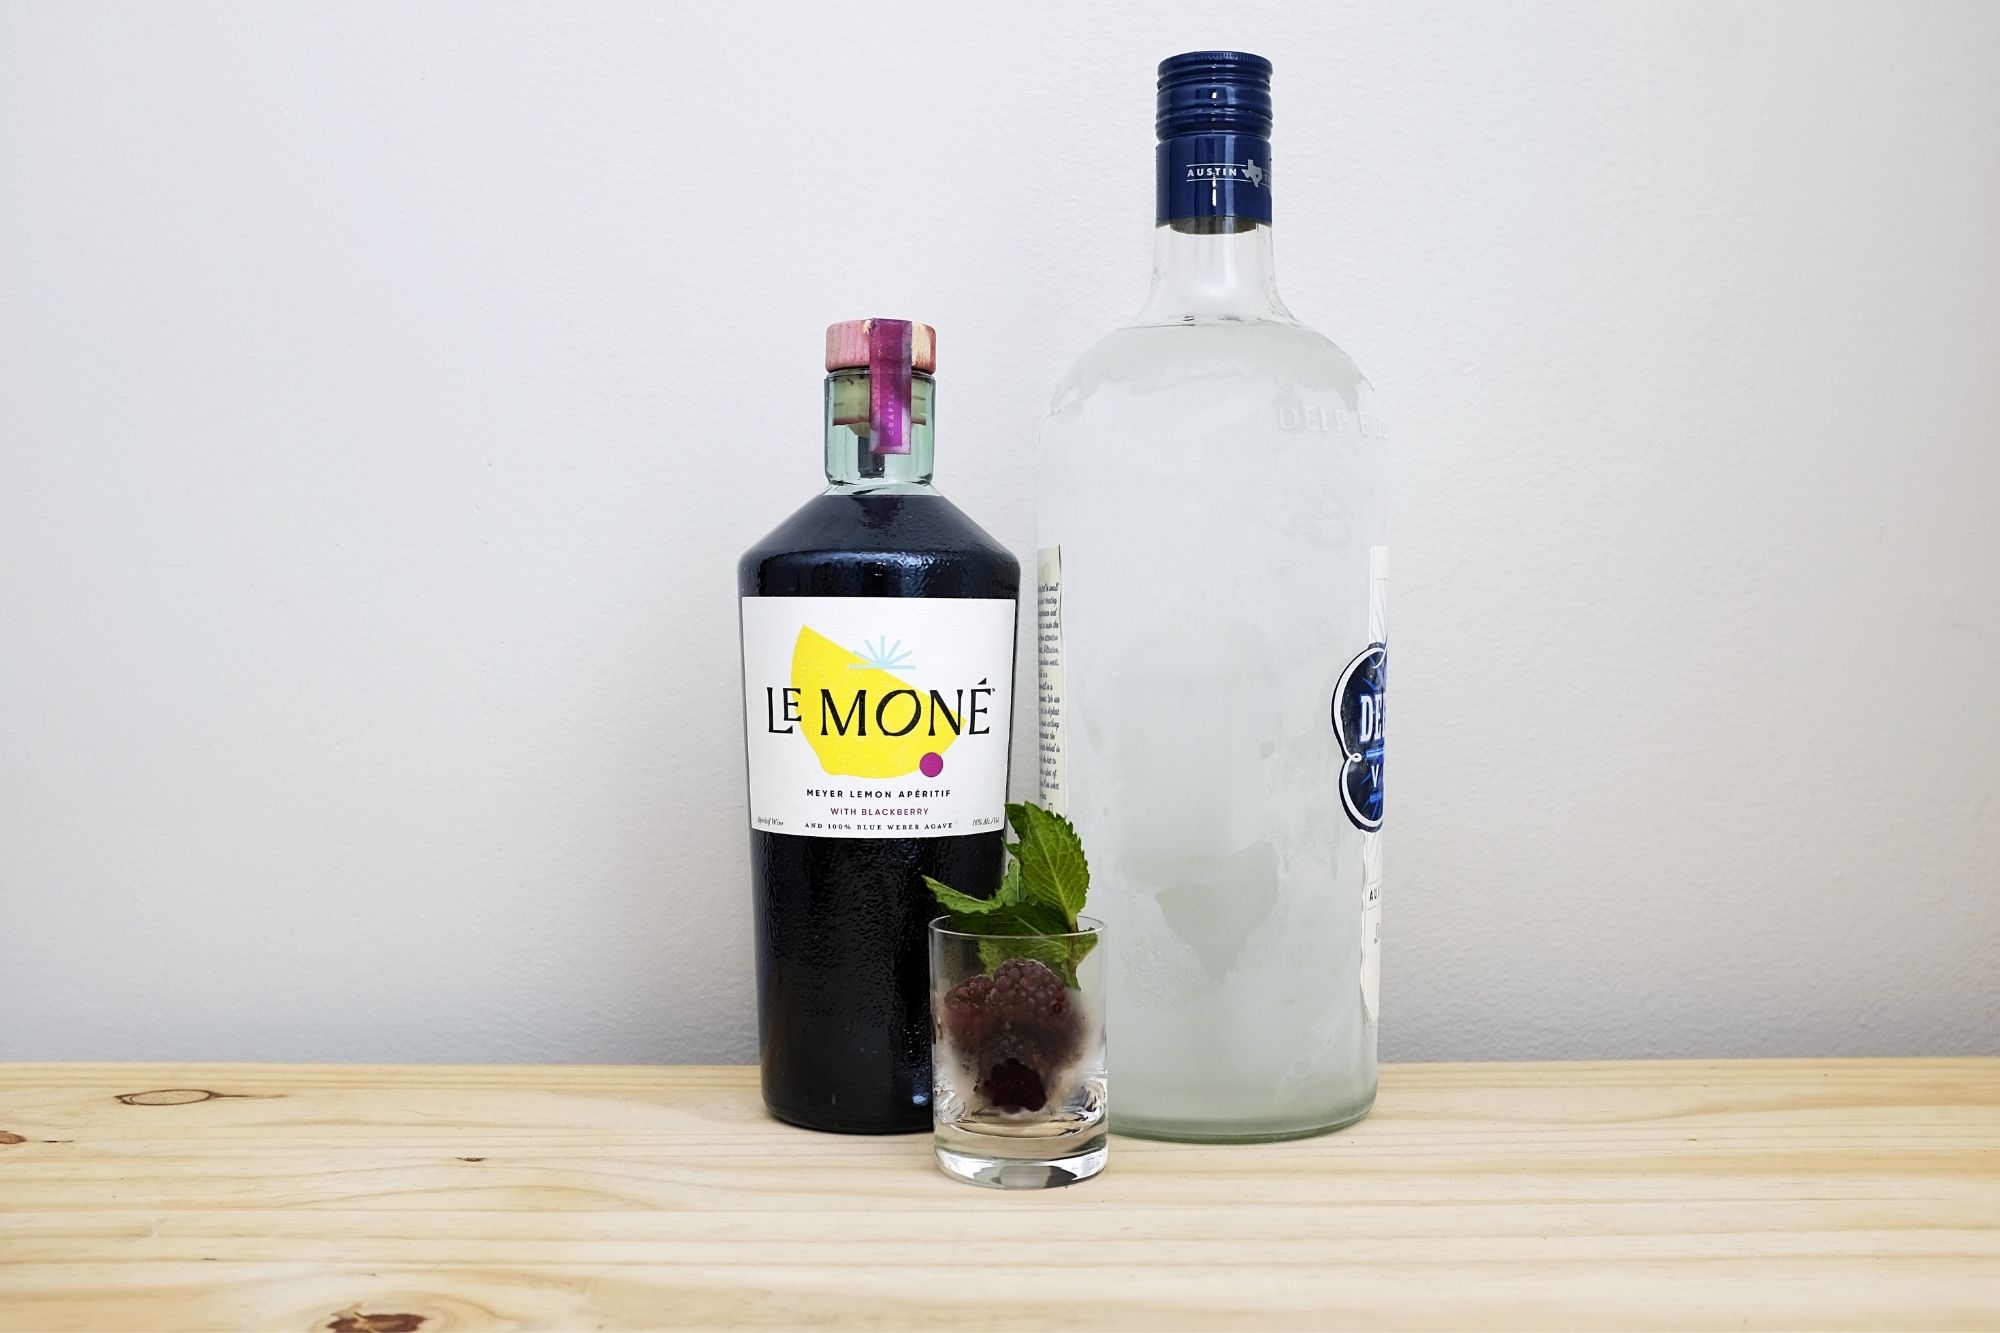 Le Mone Blackberry, Vodka, and Blackberries with Mint